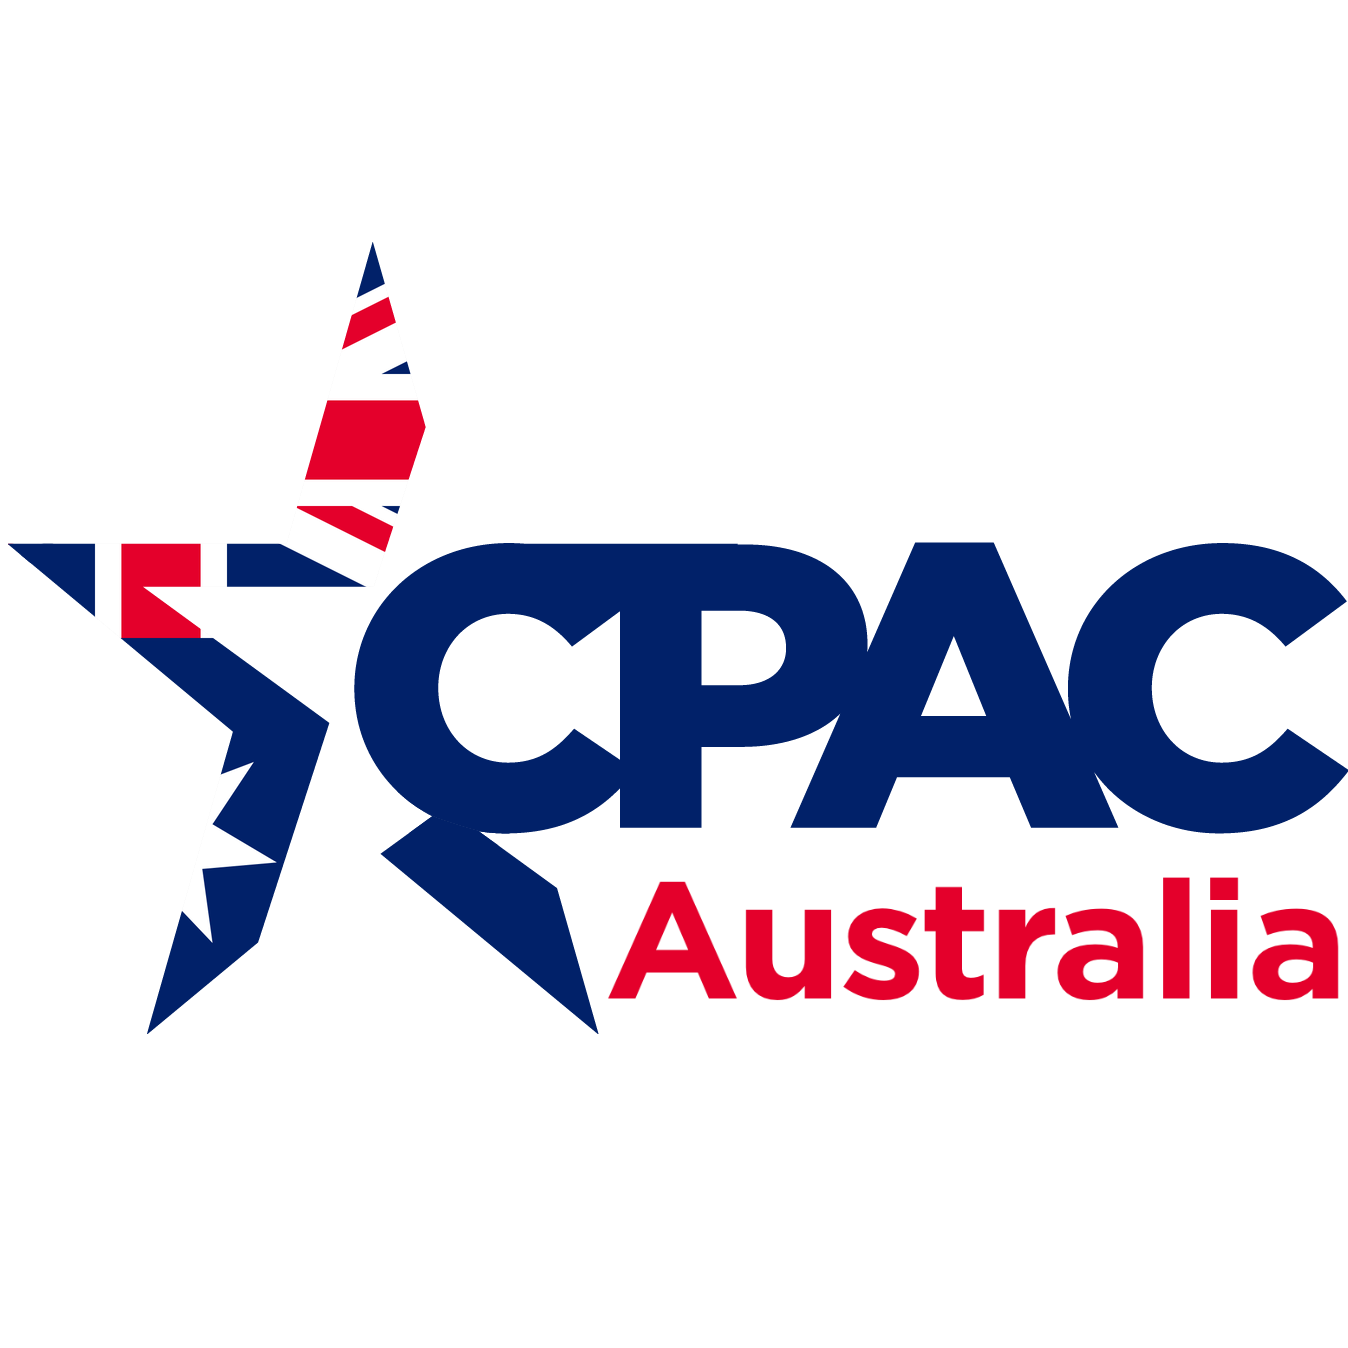 CPAC is a values based nonprofit org that espouses the best of Howard, Reagan and Thatcher while exploring new ideas & themes for the coming generations